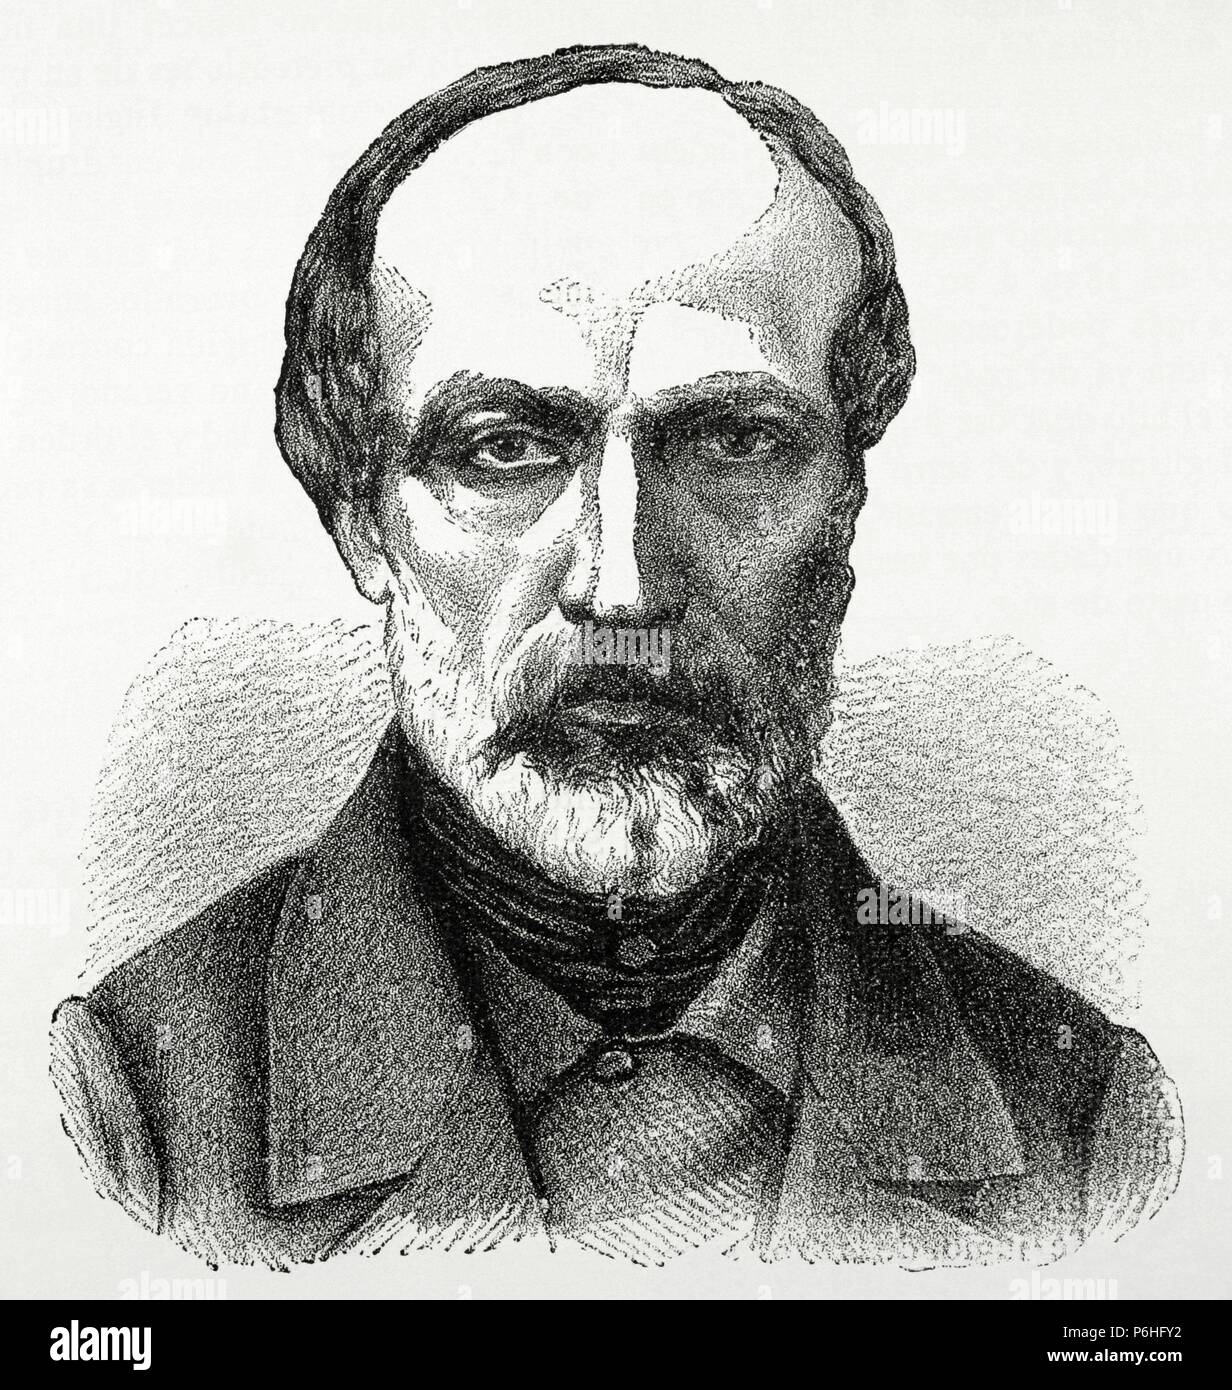 Giuseppe Mazzini (1805-1872). Italian politician, activist for the unification of Italy. Engraving by Klose. Nuestro Siglo, 1883. Stock Photo